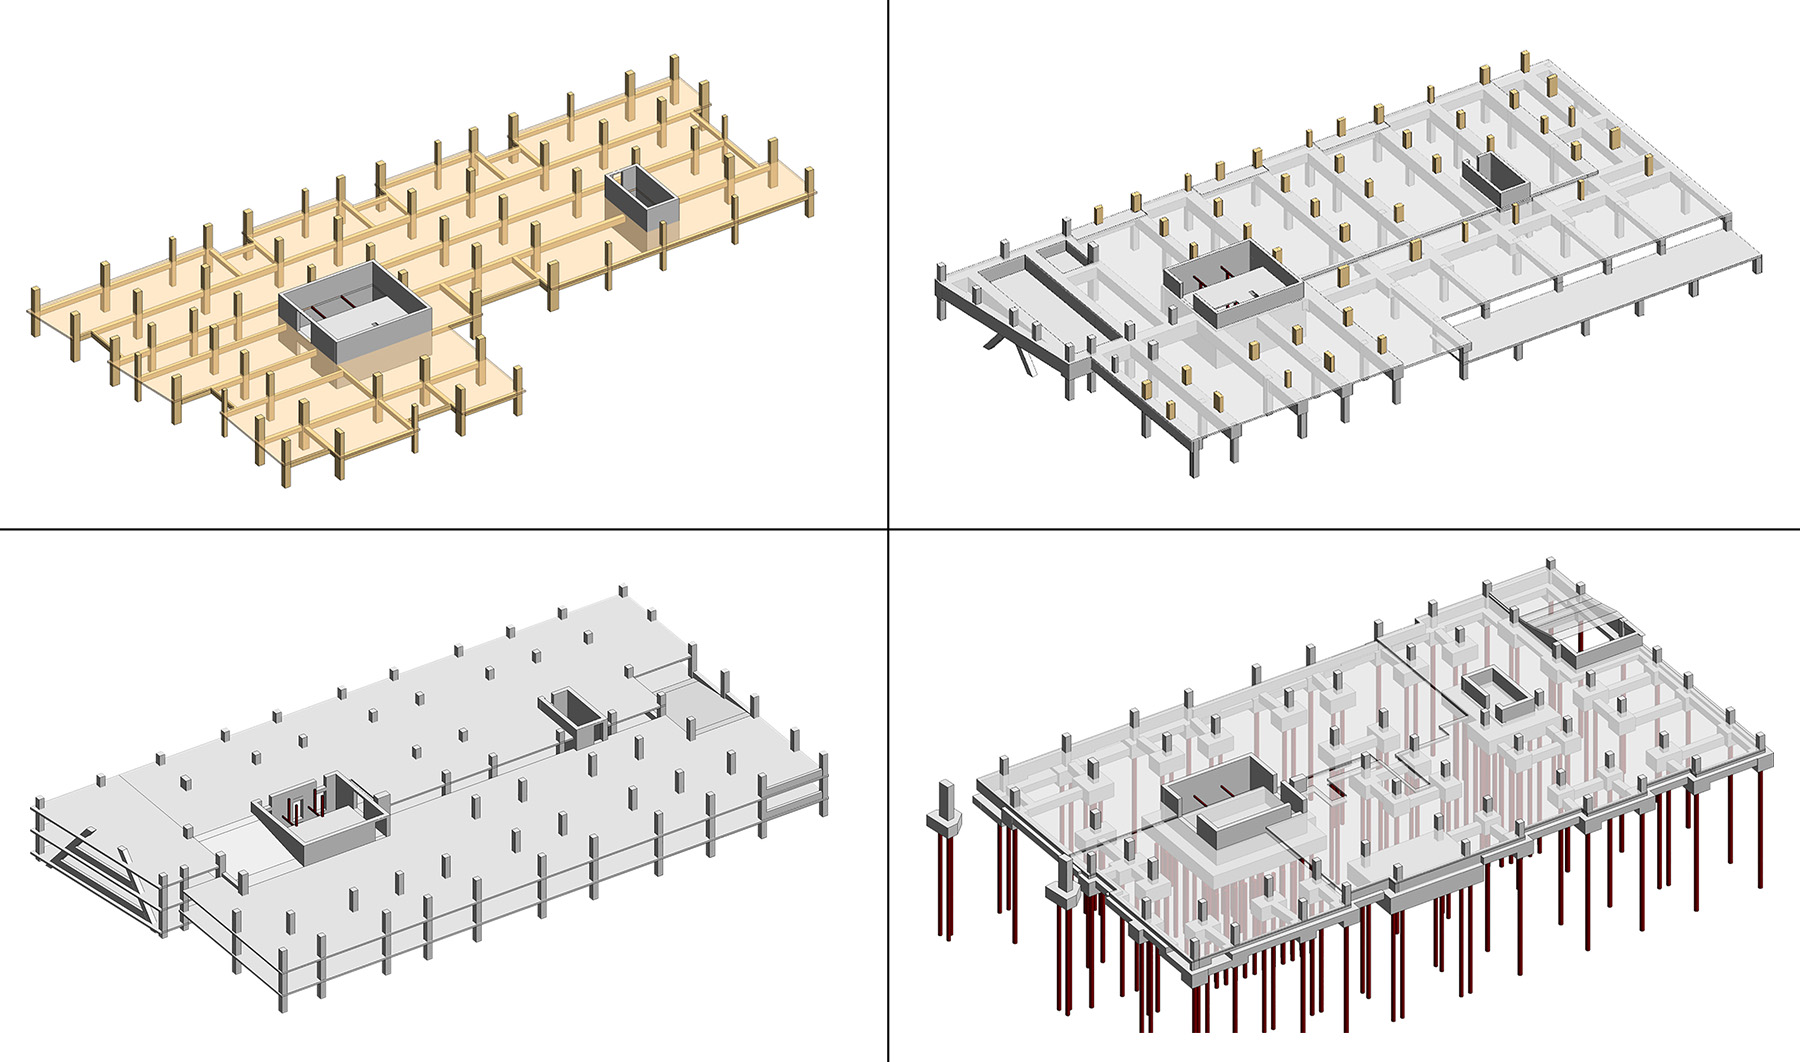 Images show the various levels of a high-rise building such as foundation, parking, and timber levels. 